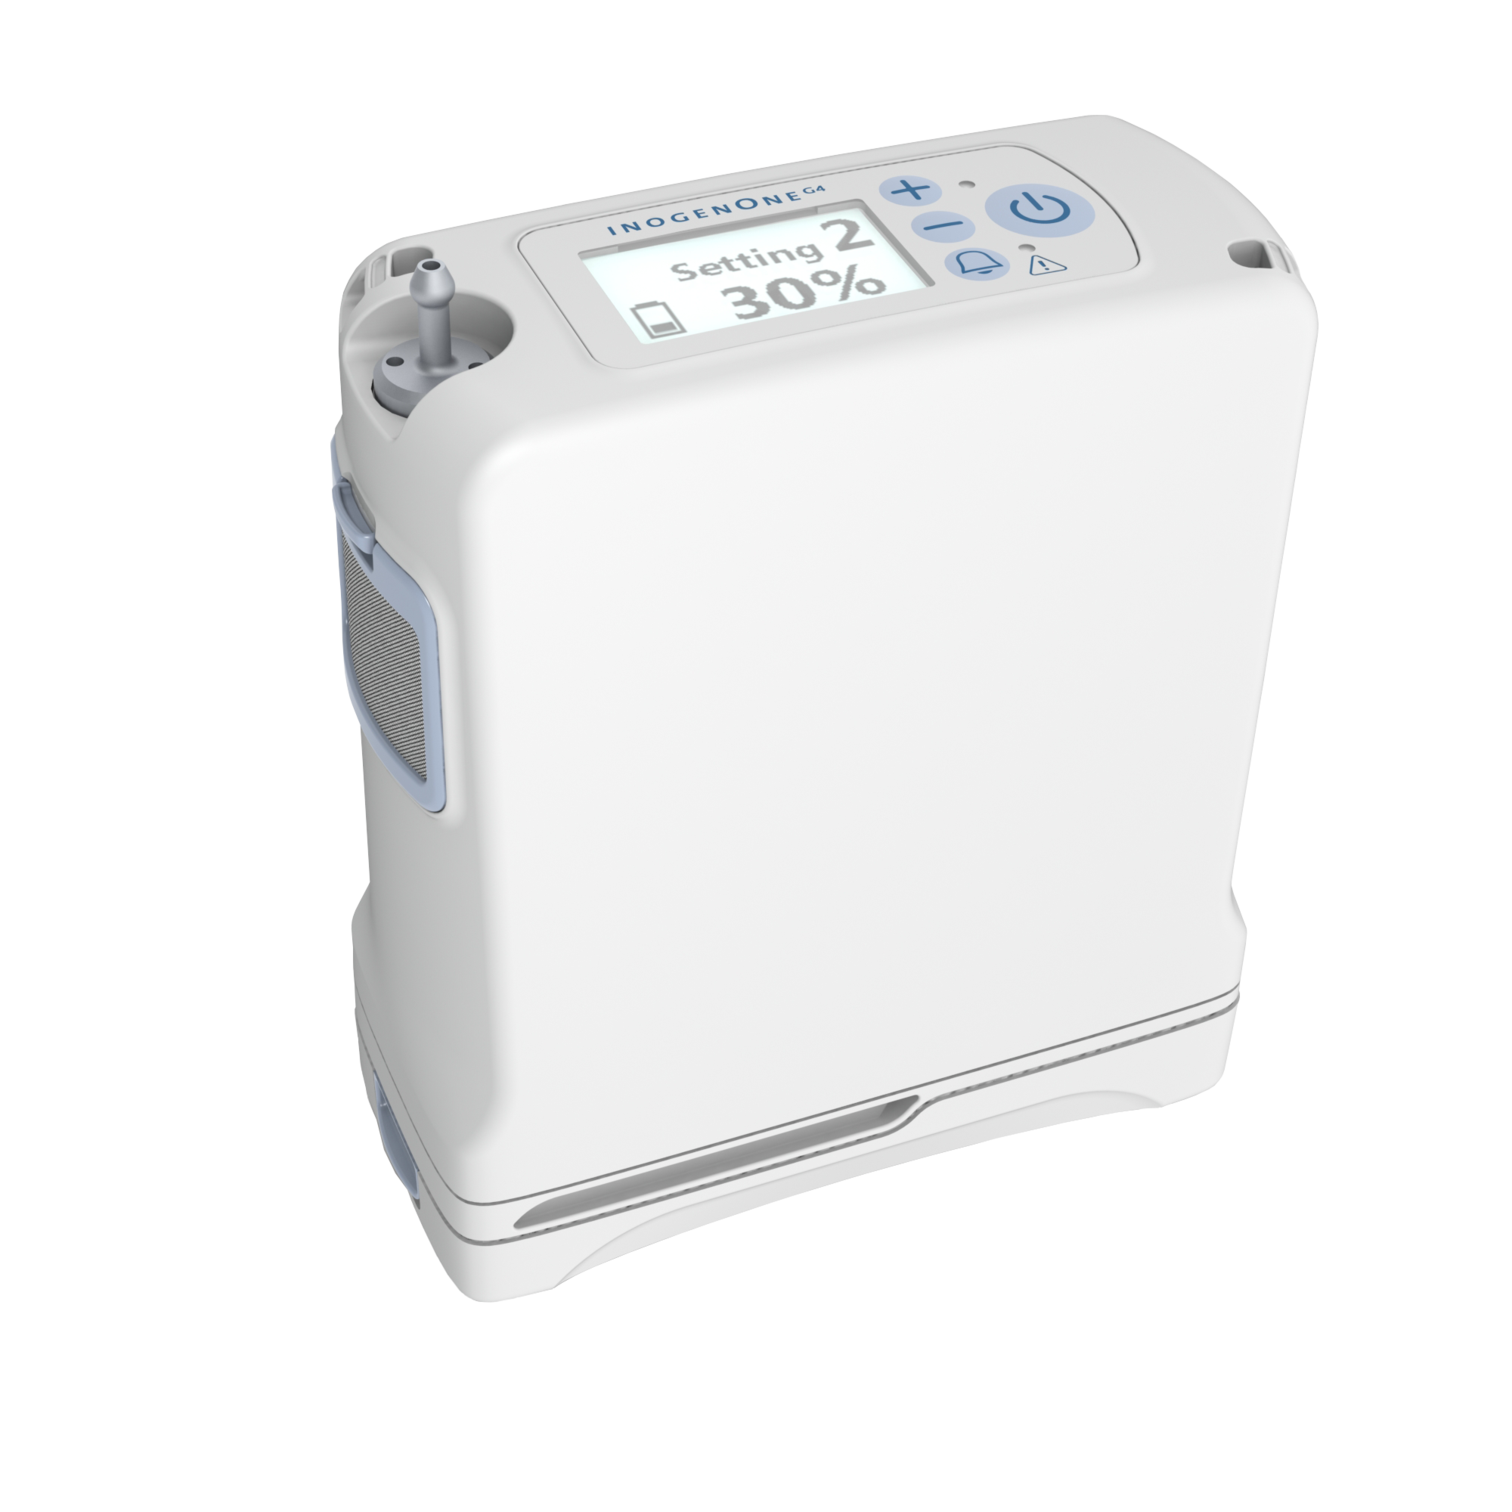 inogen-one-g4-portable-oxygen-concentrator_1512x.png?v=1613426593